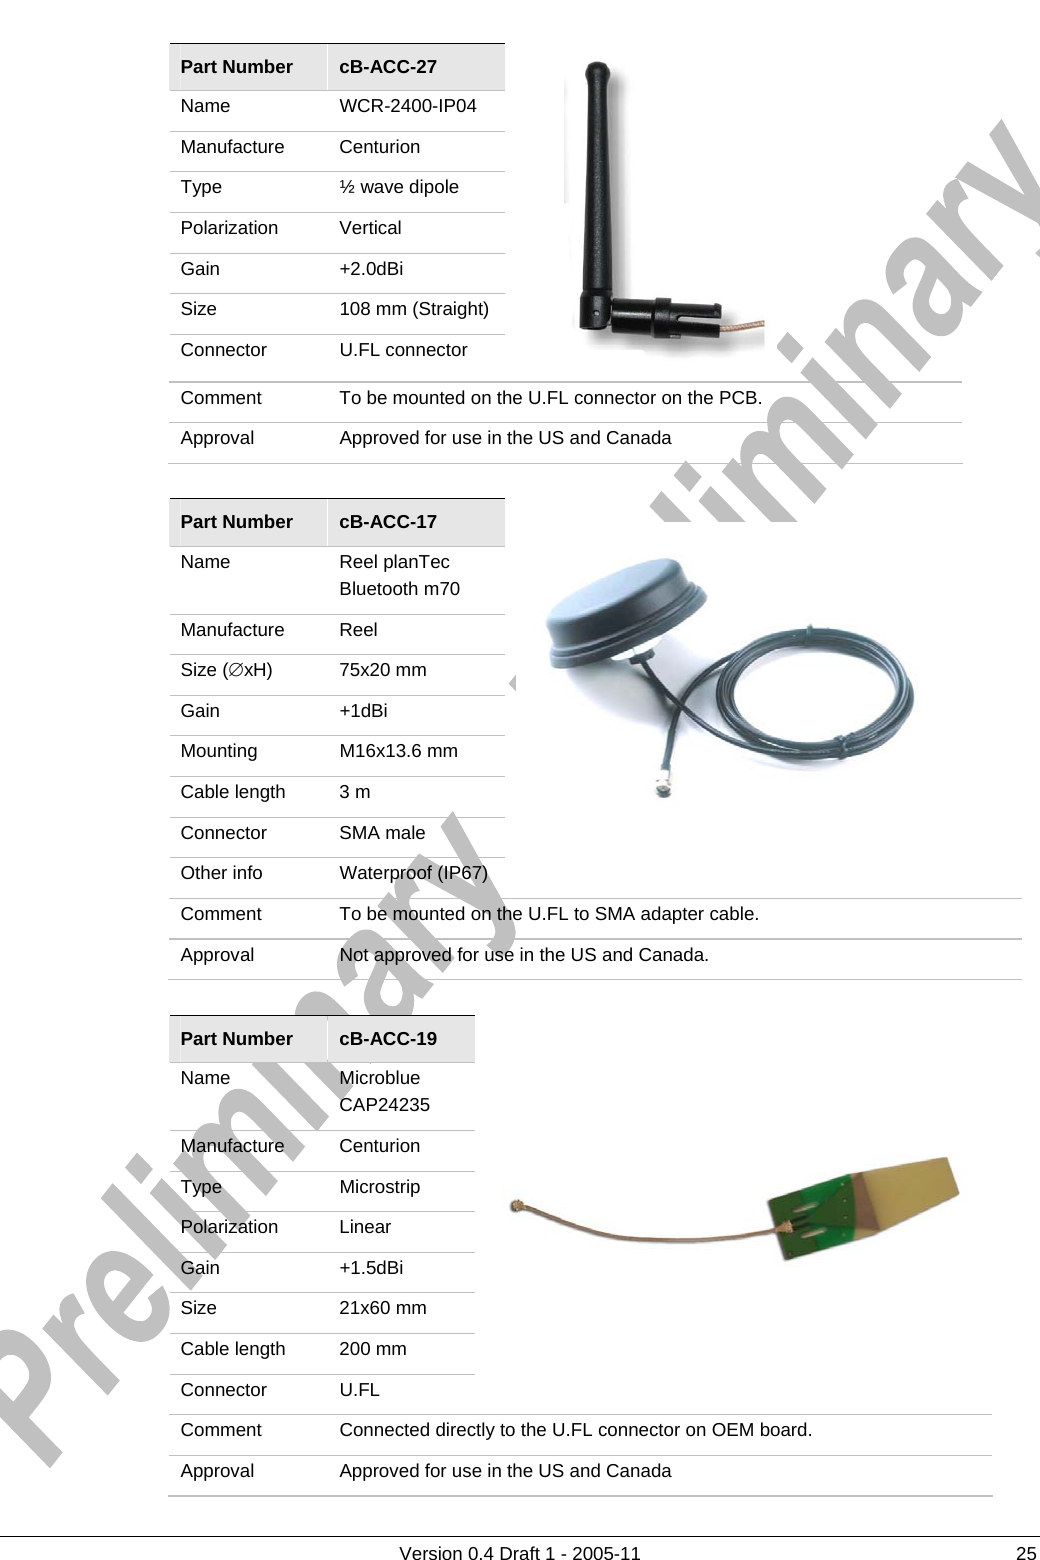          Version 0.4 Draft 1 - 2005-11  25 Part Number  cB-ACC-27 Name WCR-2400-IP04 Manufacture Centurion Type ½ wave dipole Polarization Vertical Gain +2.0dBi Size  108 mm (Straight) Connector U.FL connector   Comment  To be mounted on the U.FL connector on the PCB.   Approval  Approved for use in the US and Canada  Part Number  cB-ACC-17 Name Reel planTec Bluetooth m70 Manufacture Reel Size (∅xH) 75x20 mm Gain +1dBi Mounting   M16x13.6 mm Cable length  3 m Connector SMA male Other info  Waterproof (IP67)   Comment  To be mounted on the U.FL to SMA adapter cable.  Approval  Not approved for use in the US and Canada.  Part Number  cB-ACC-19 Name Microblue CAP24235  Manufacture Centurion Type Microstrip Polarization Linear Gain +1.5dBi Size 21x60 mm Cable length  200 mm Connector U.FL  Comment  Connected directly to the U.FL connector on OEM board. Approval  Approved for use in the US and Canada 